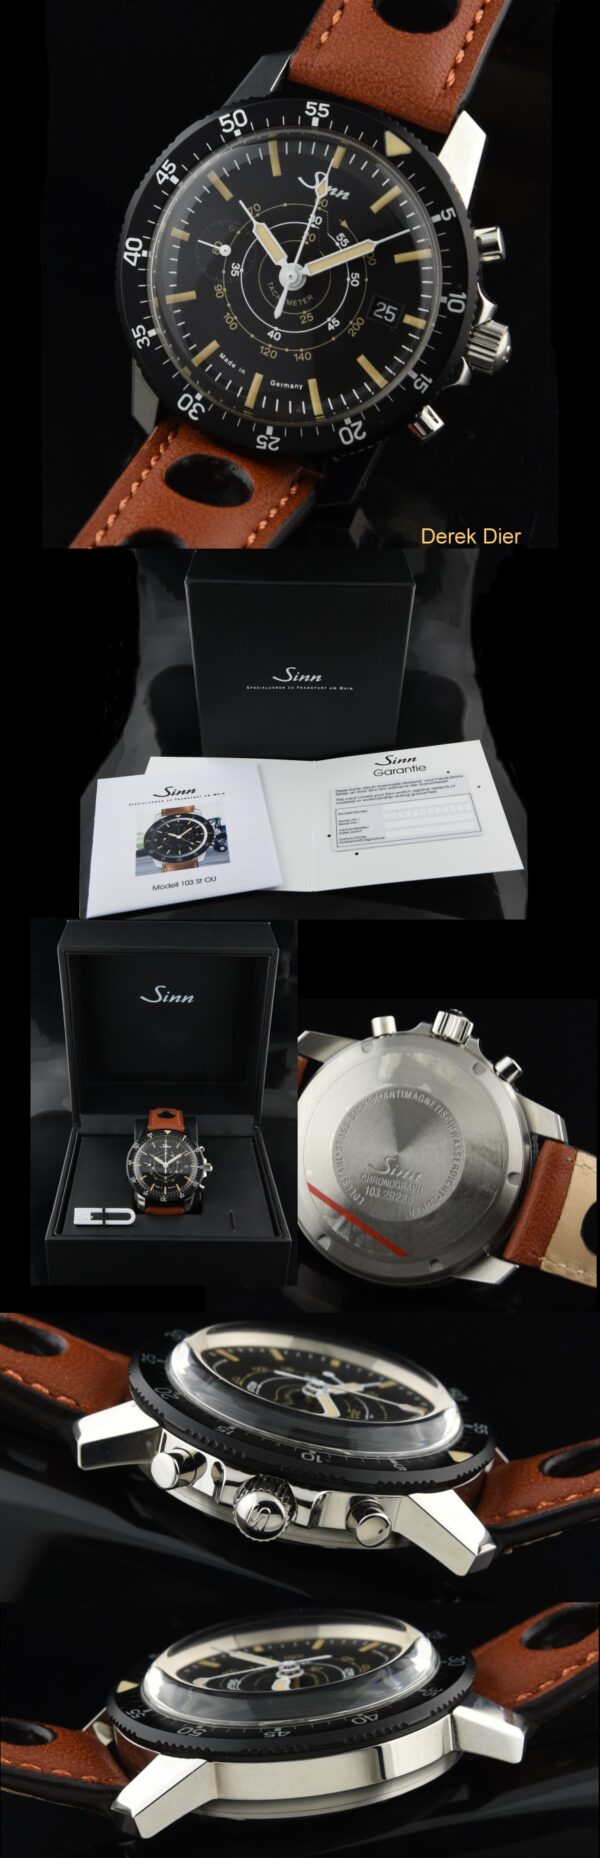 2012 Sinn Tachymetric Manufactum-Edition pilot's chronograph watch with original box, papers, Super-LumiNova-coated hands, and band/buckle.